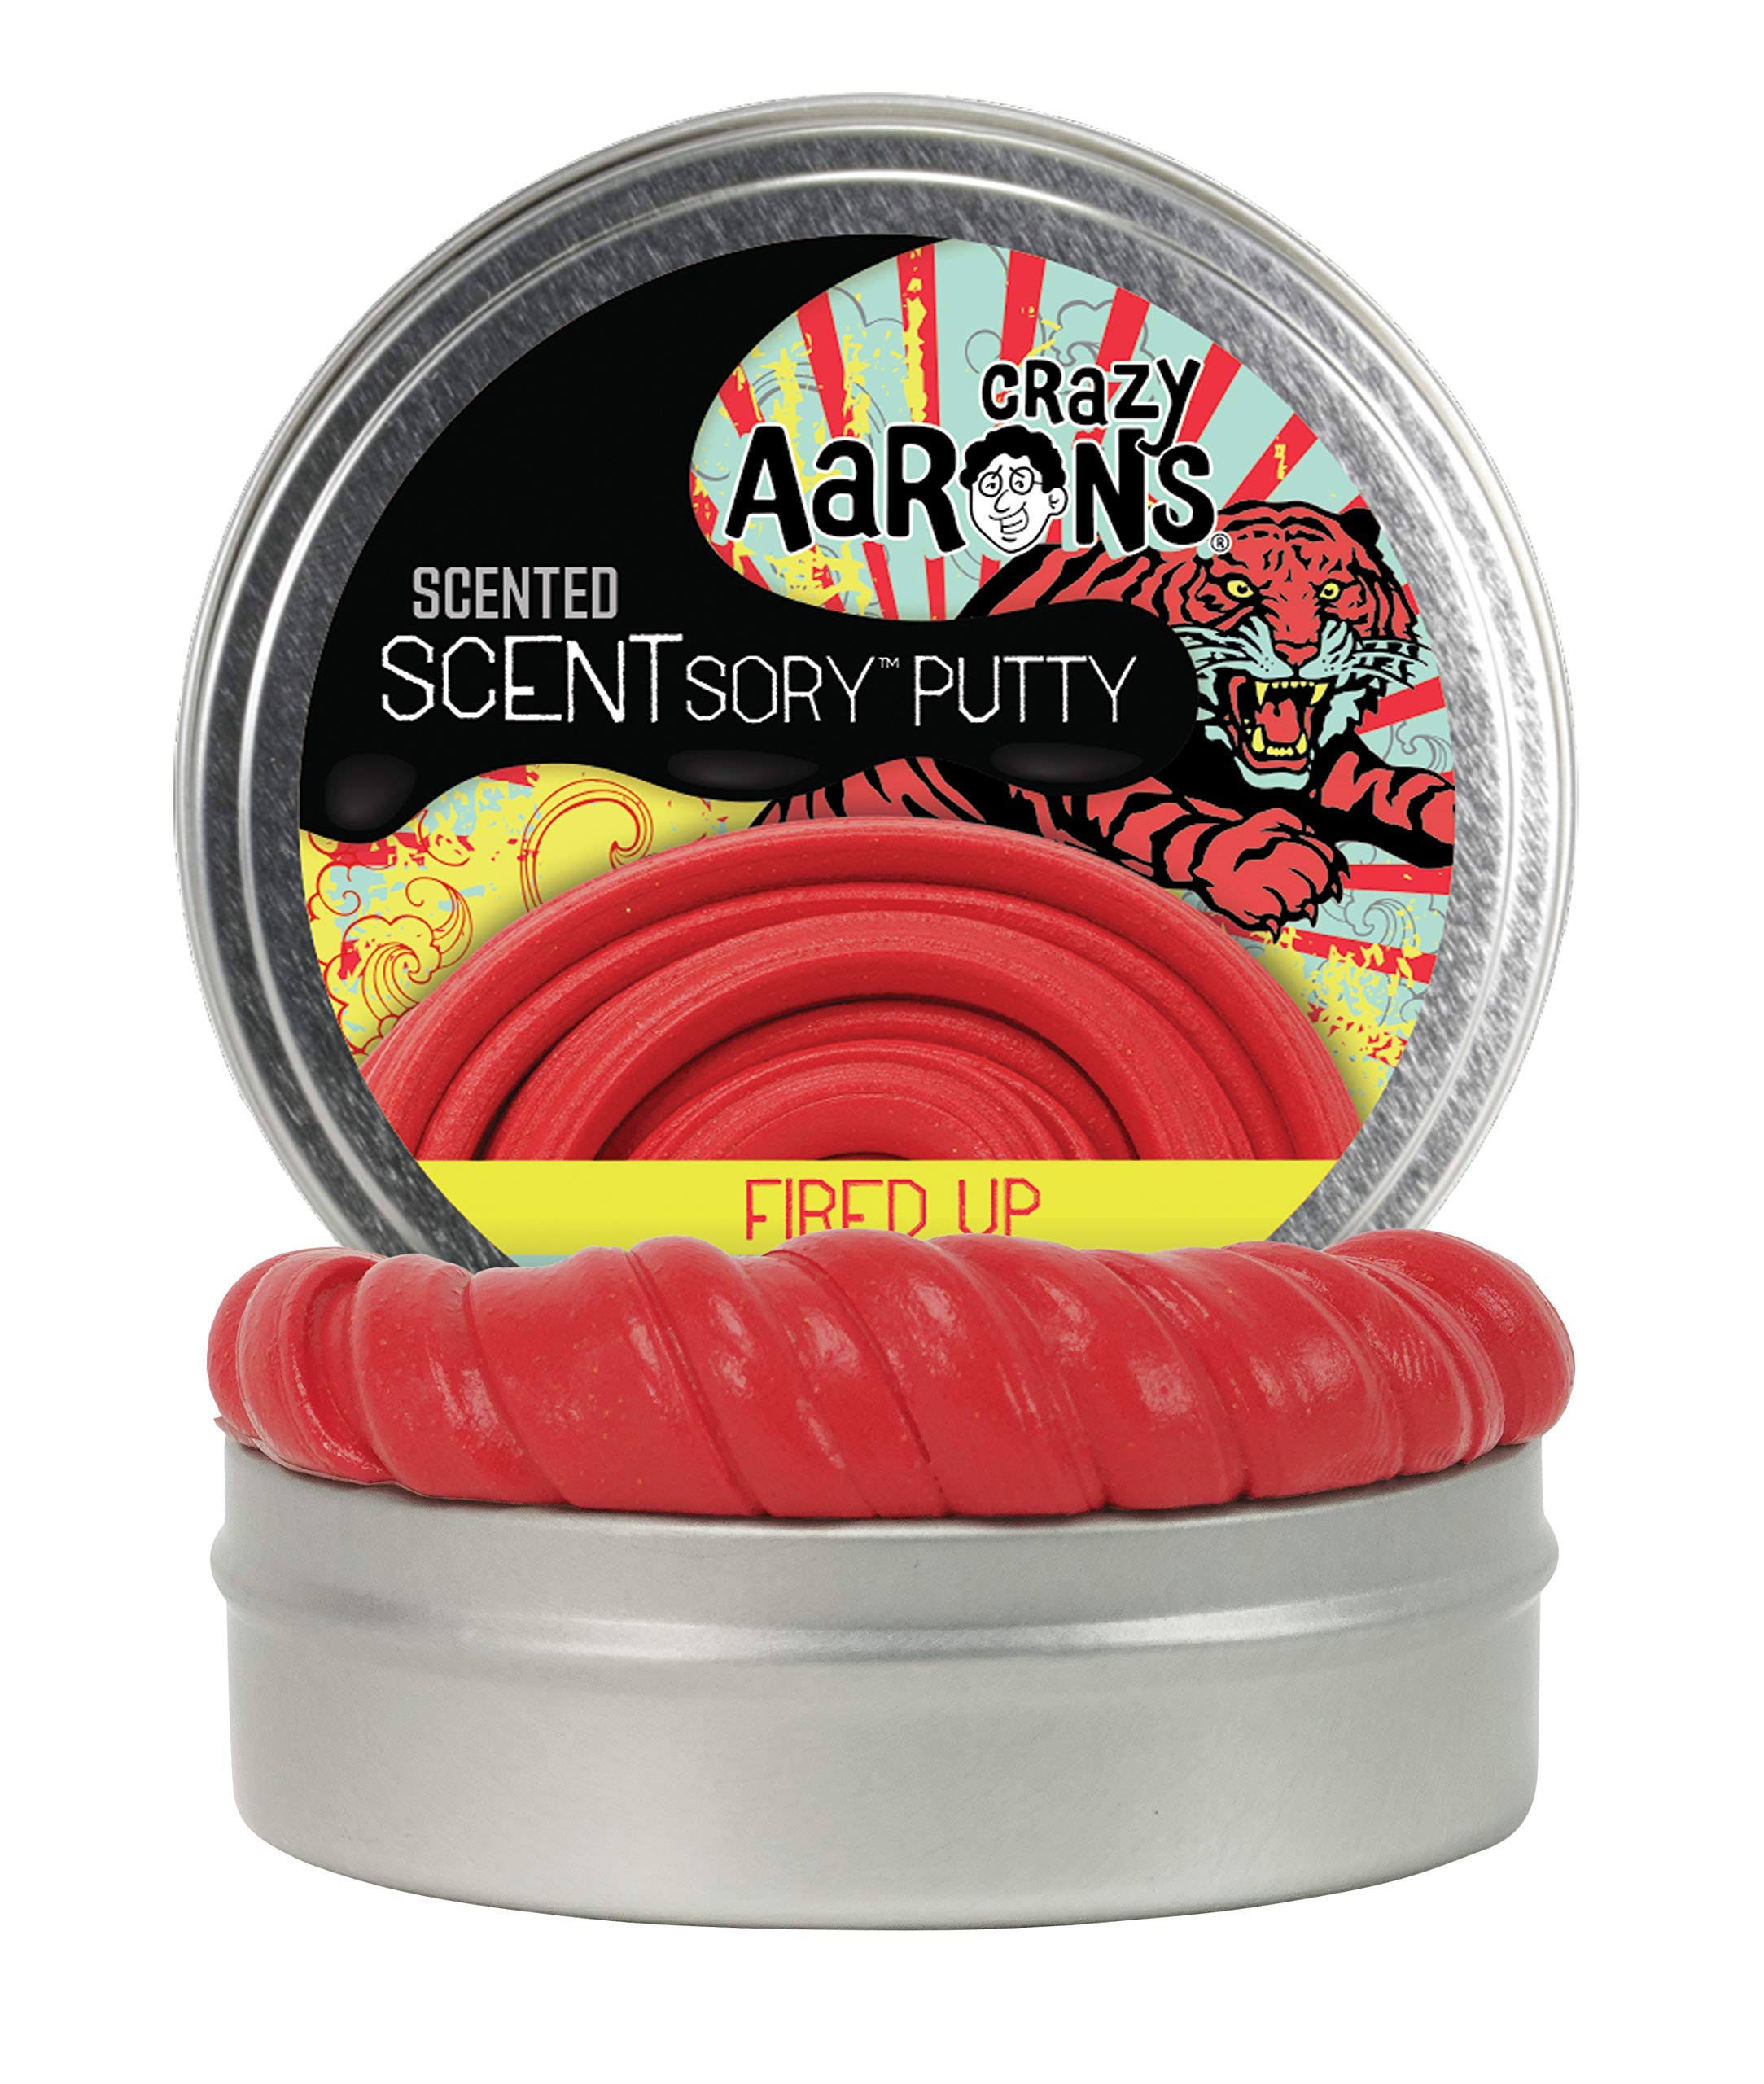 Crazy Aaron Fired Up Scentsory Putty